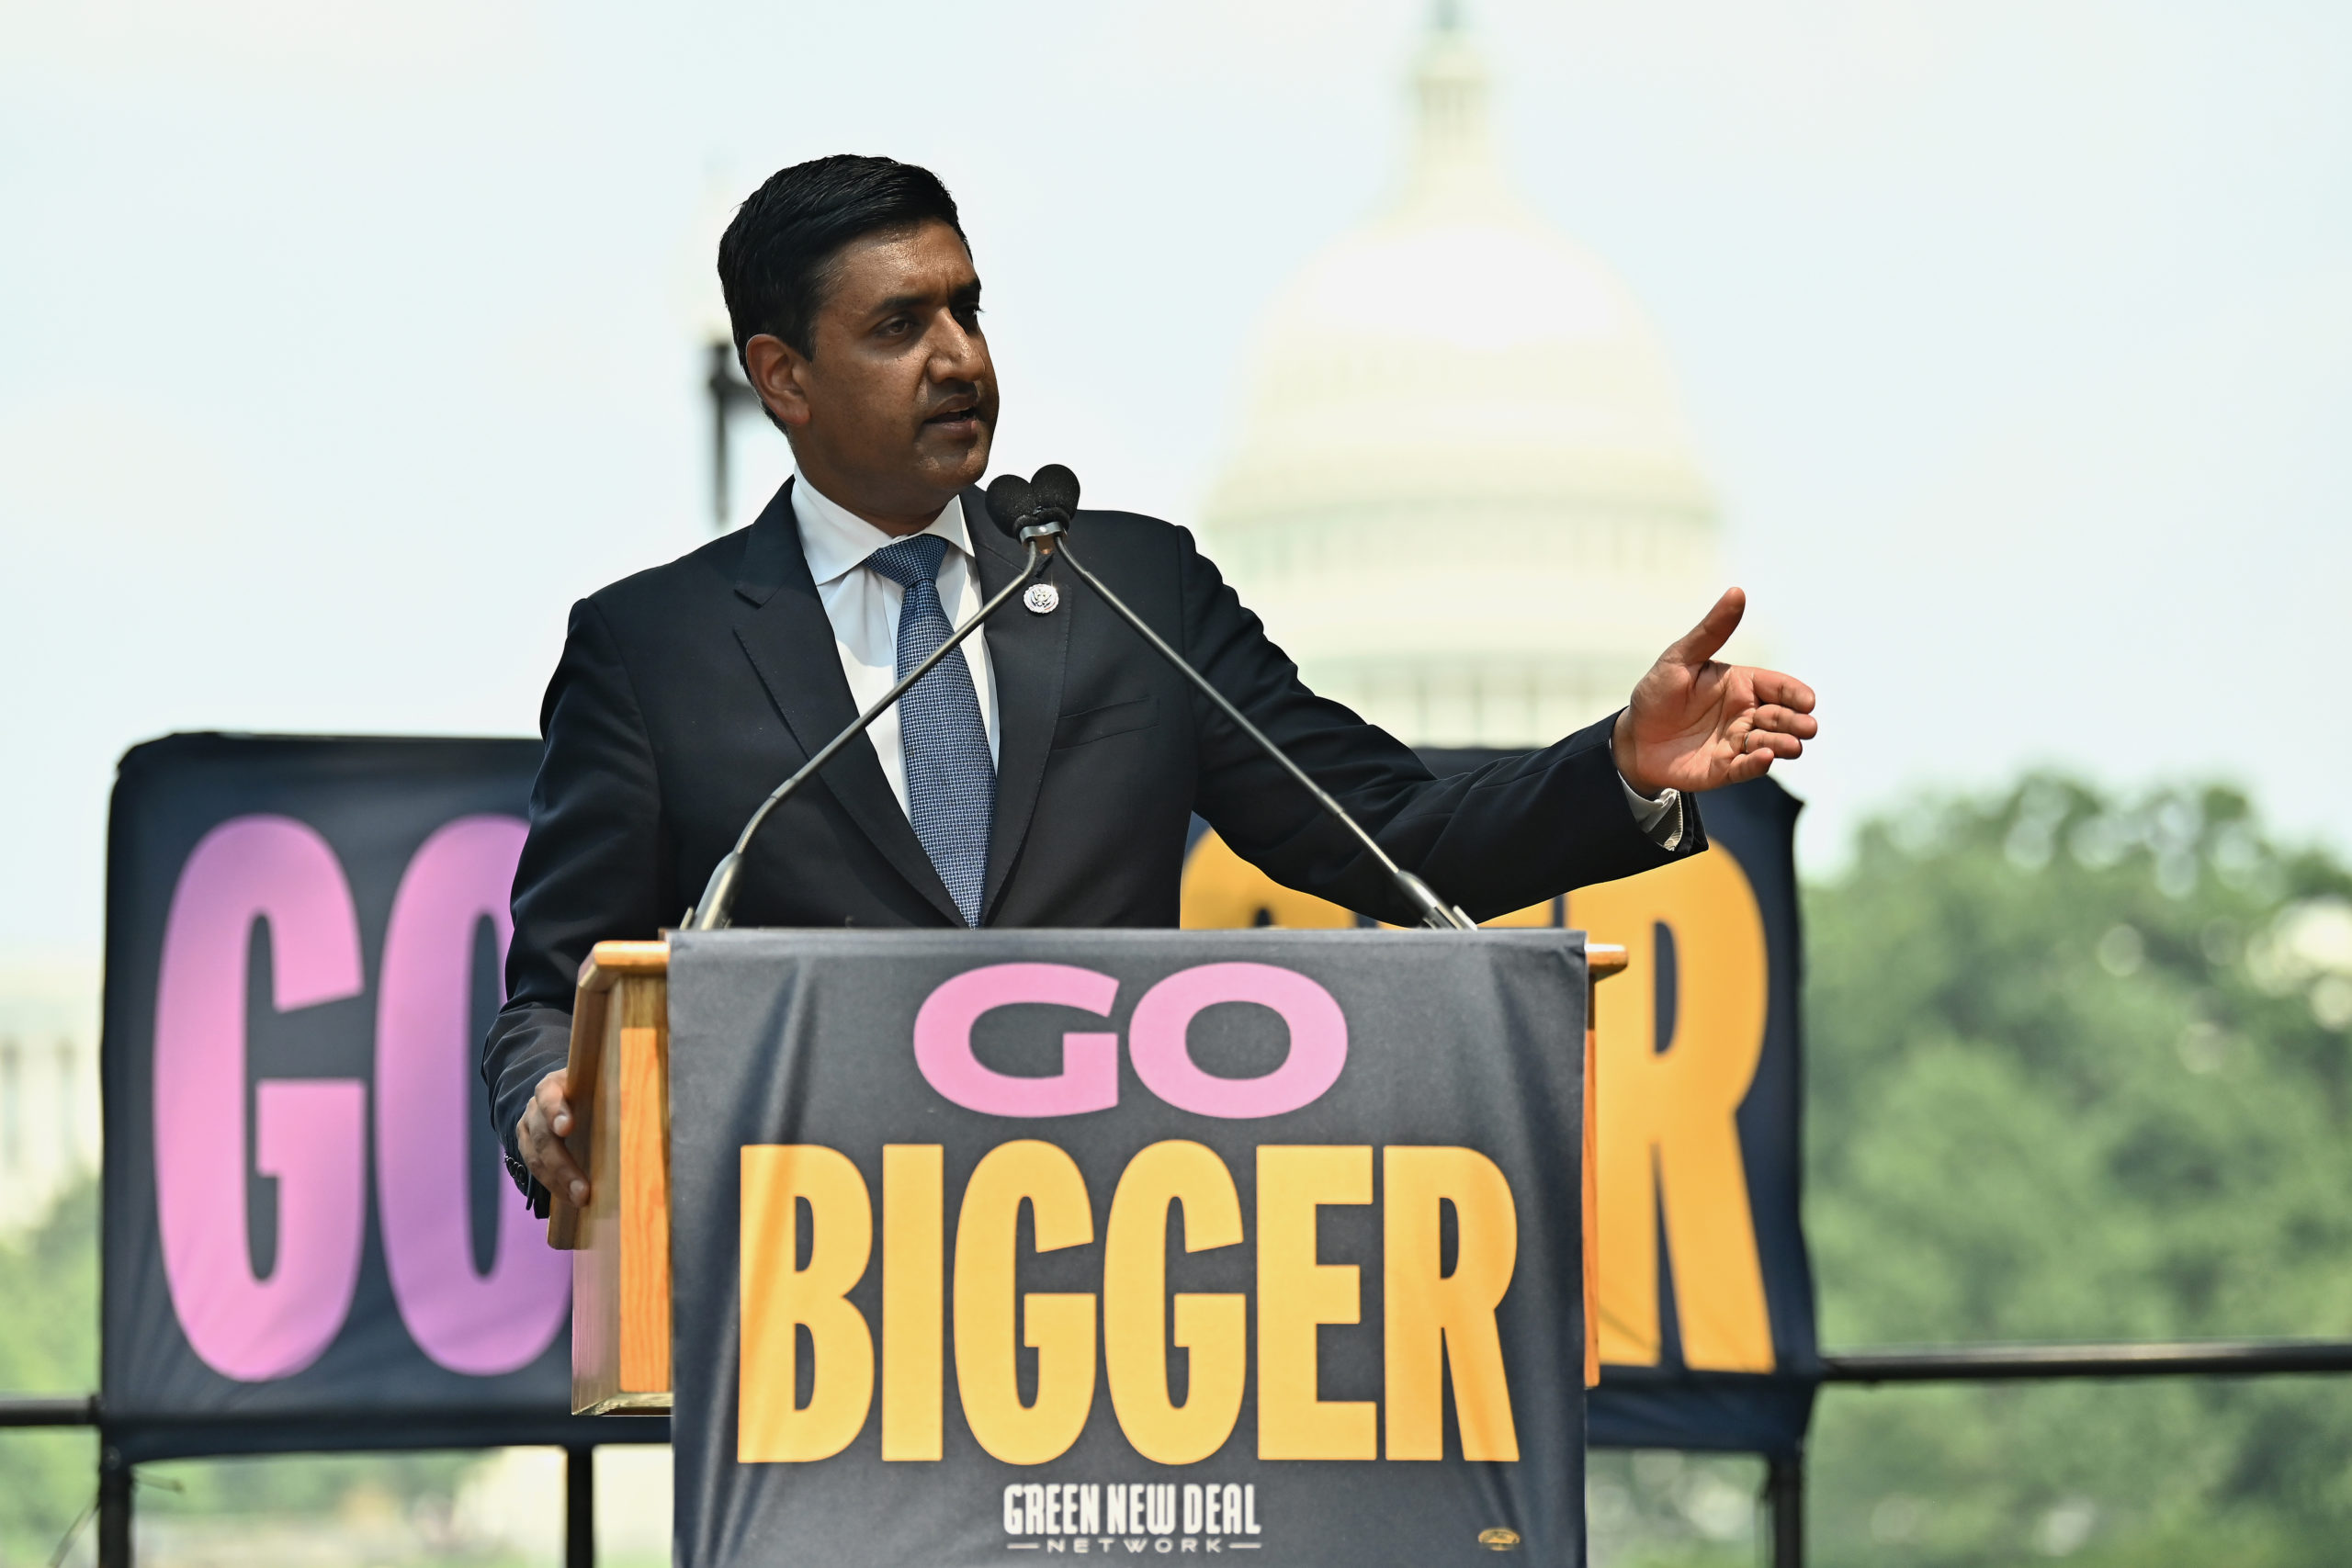 Rep. Ro Khanna speaks at a climate rally on July 20. (Shannon Finney/Getty Images for Green New Deal Network)